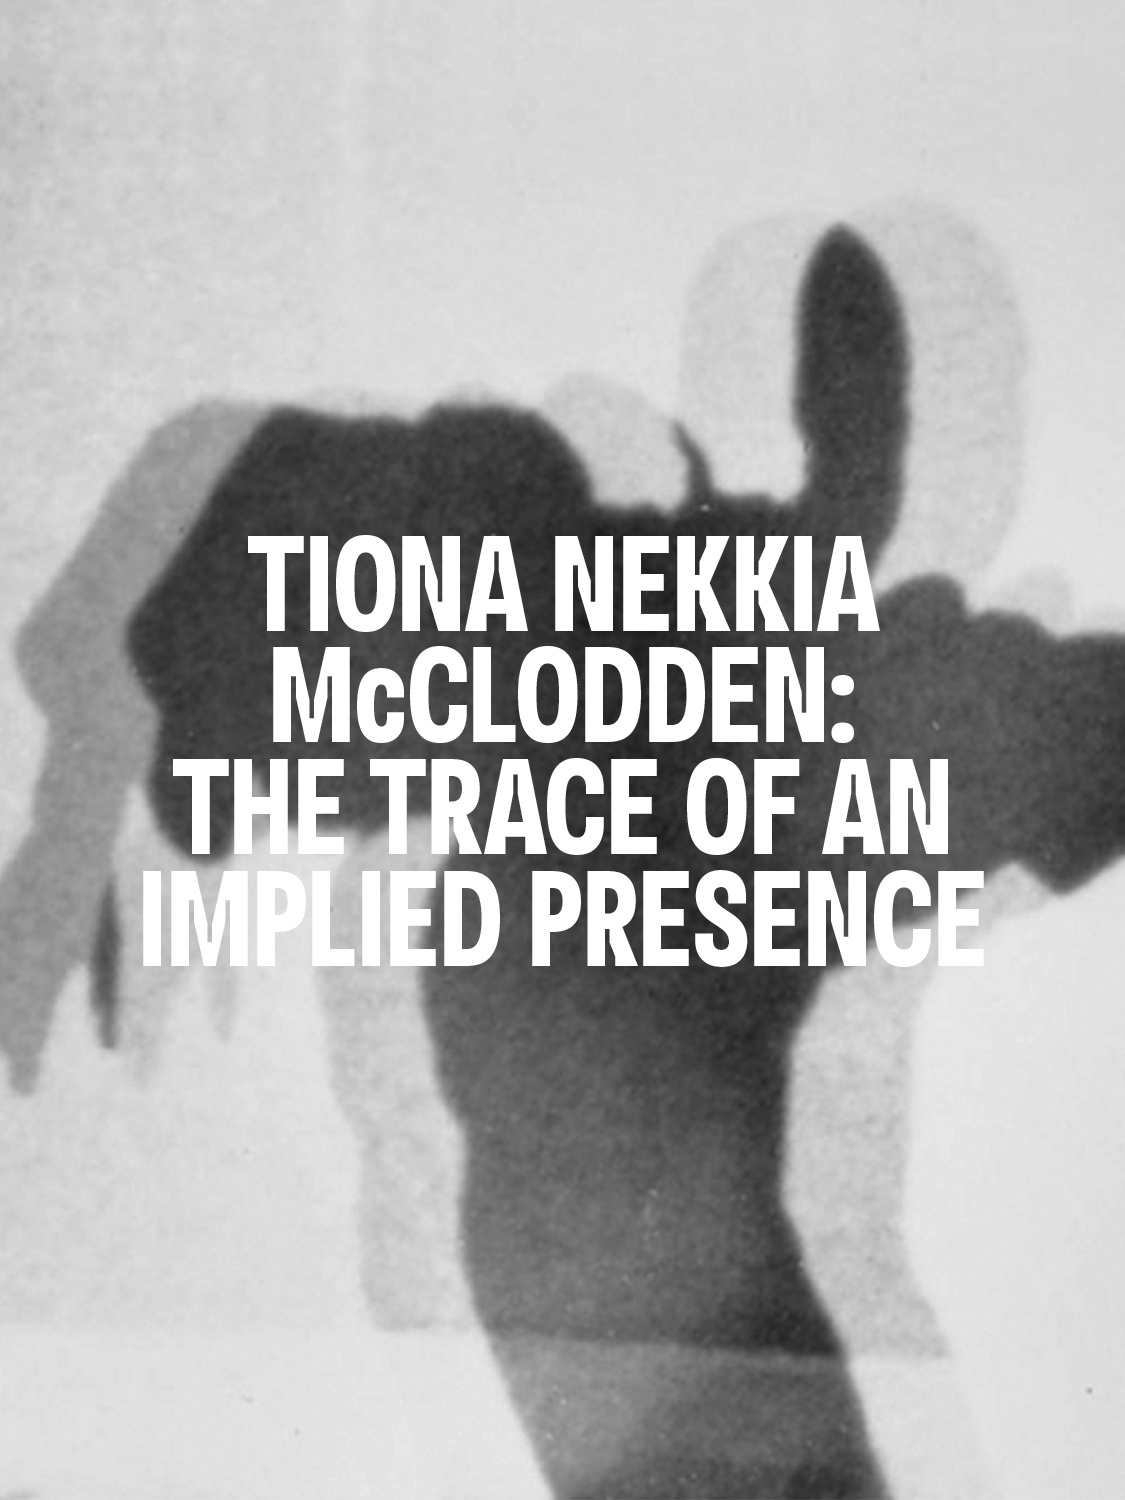 The blurry, black-and-white shadow of a human figure is seen cast on a wall. The shadow appears as if double exposed in a photograph. Over the image in white text reads Tiona Nekkia McClodden: The Trace of an Implied Presence.